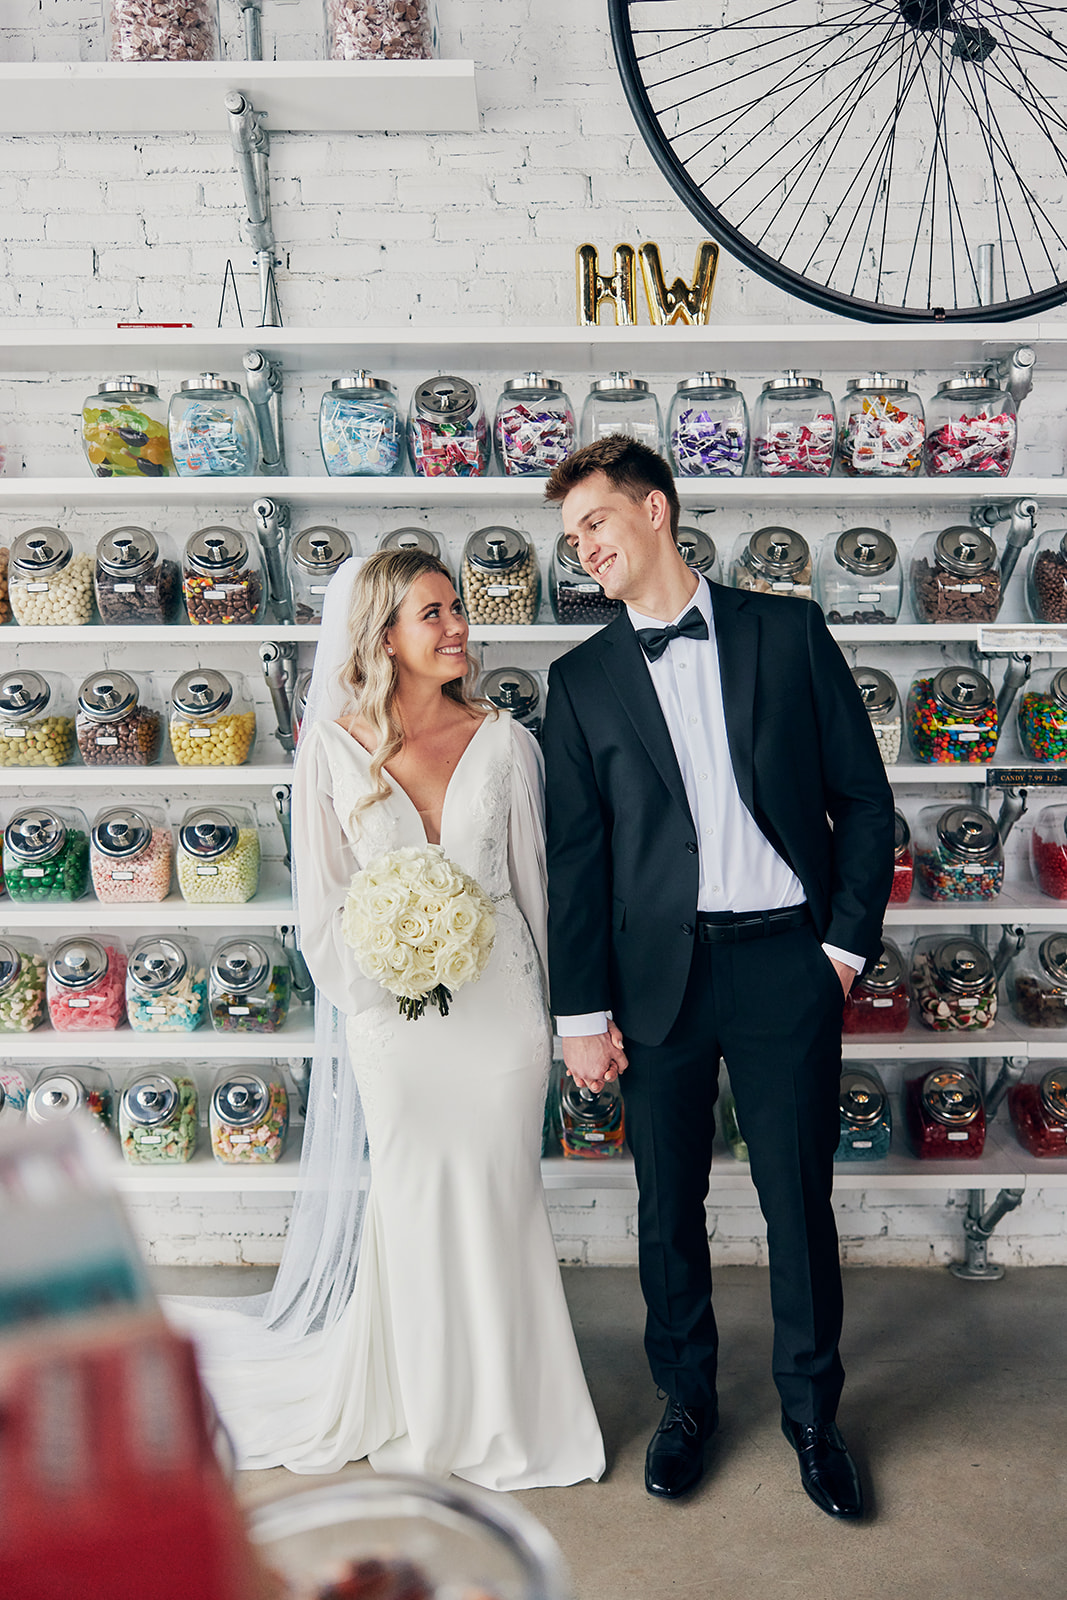 candy store wedding in northern mn